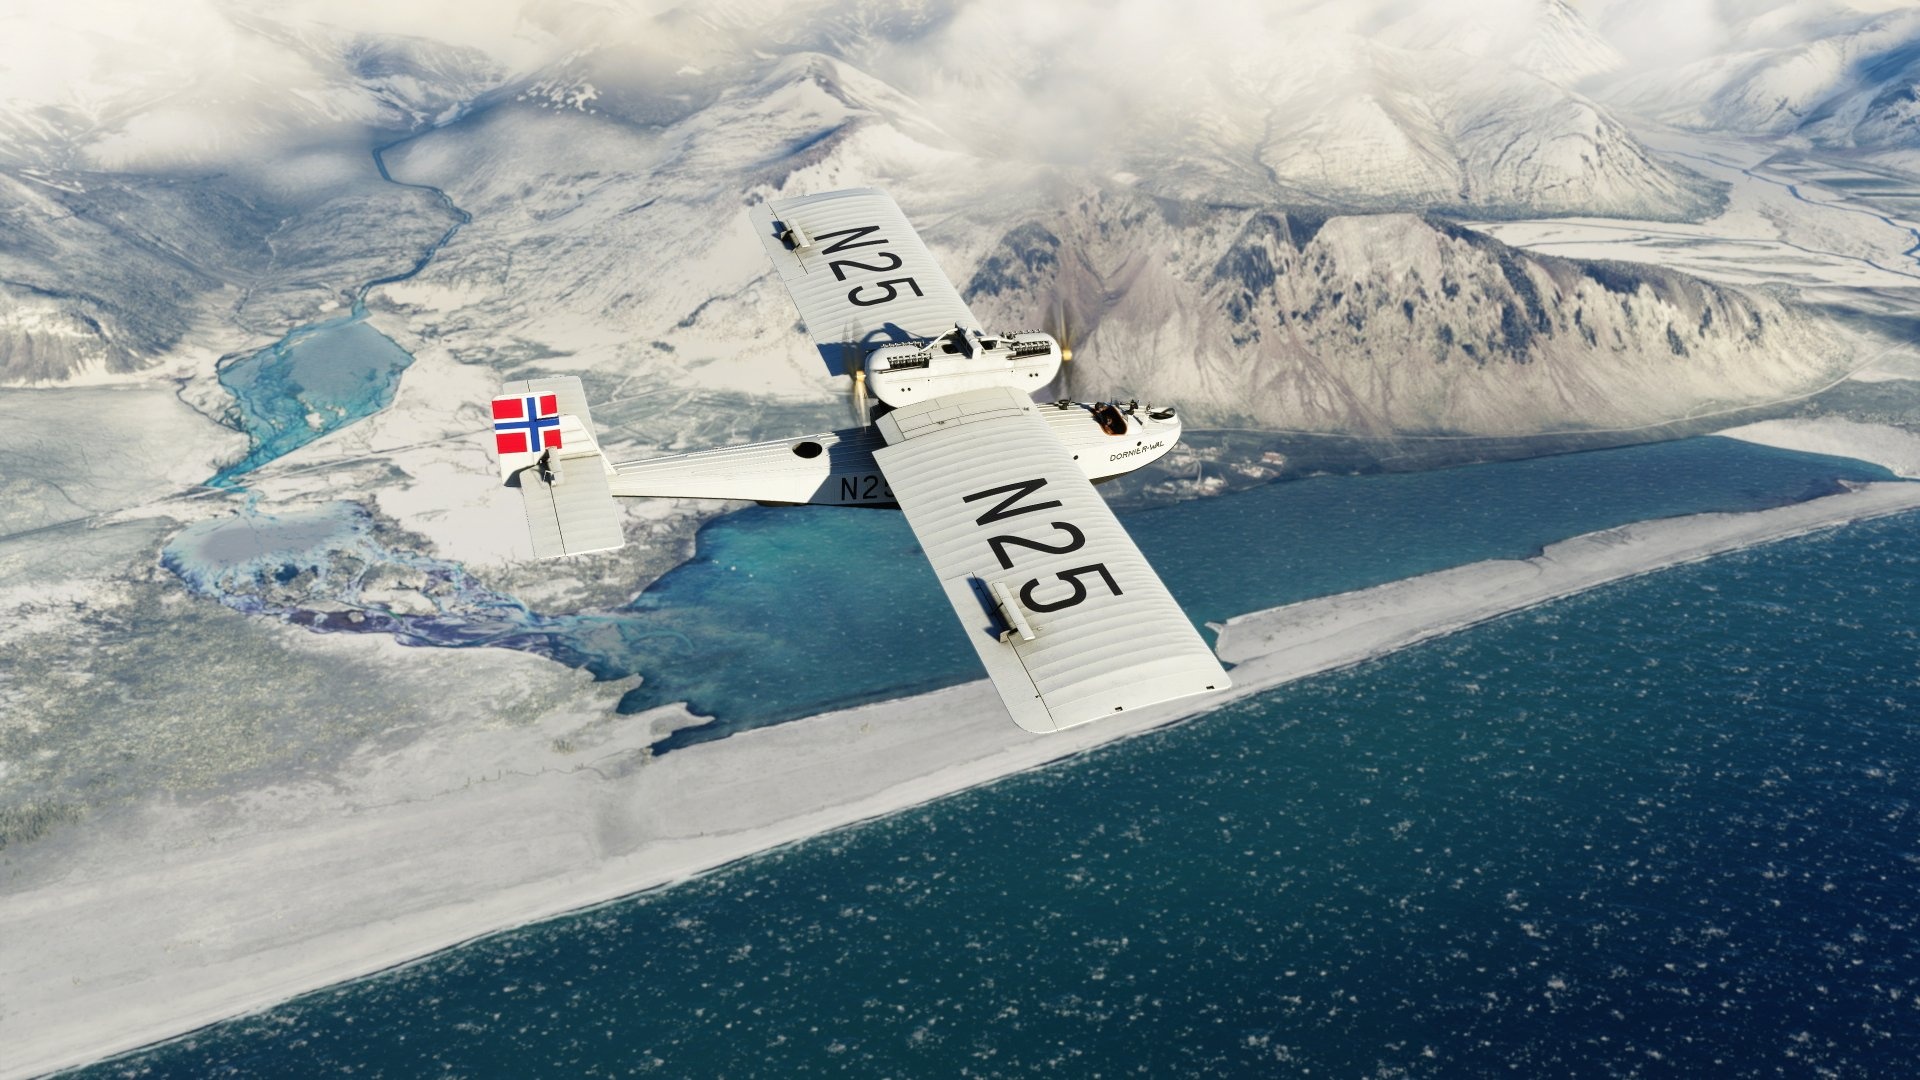 Dornier Do X Wallpaper posted by Ethan Anderson 1920x1080